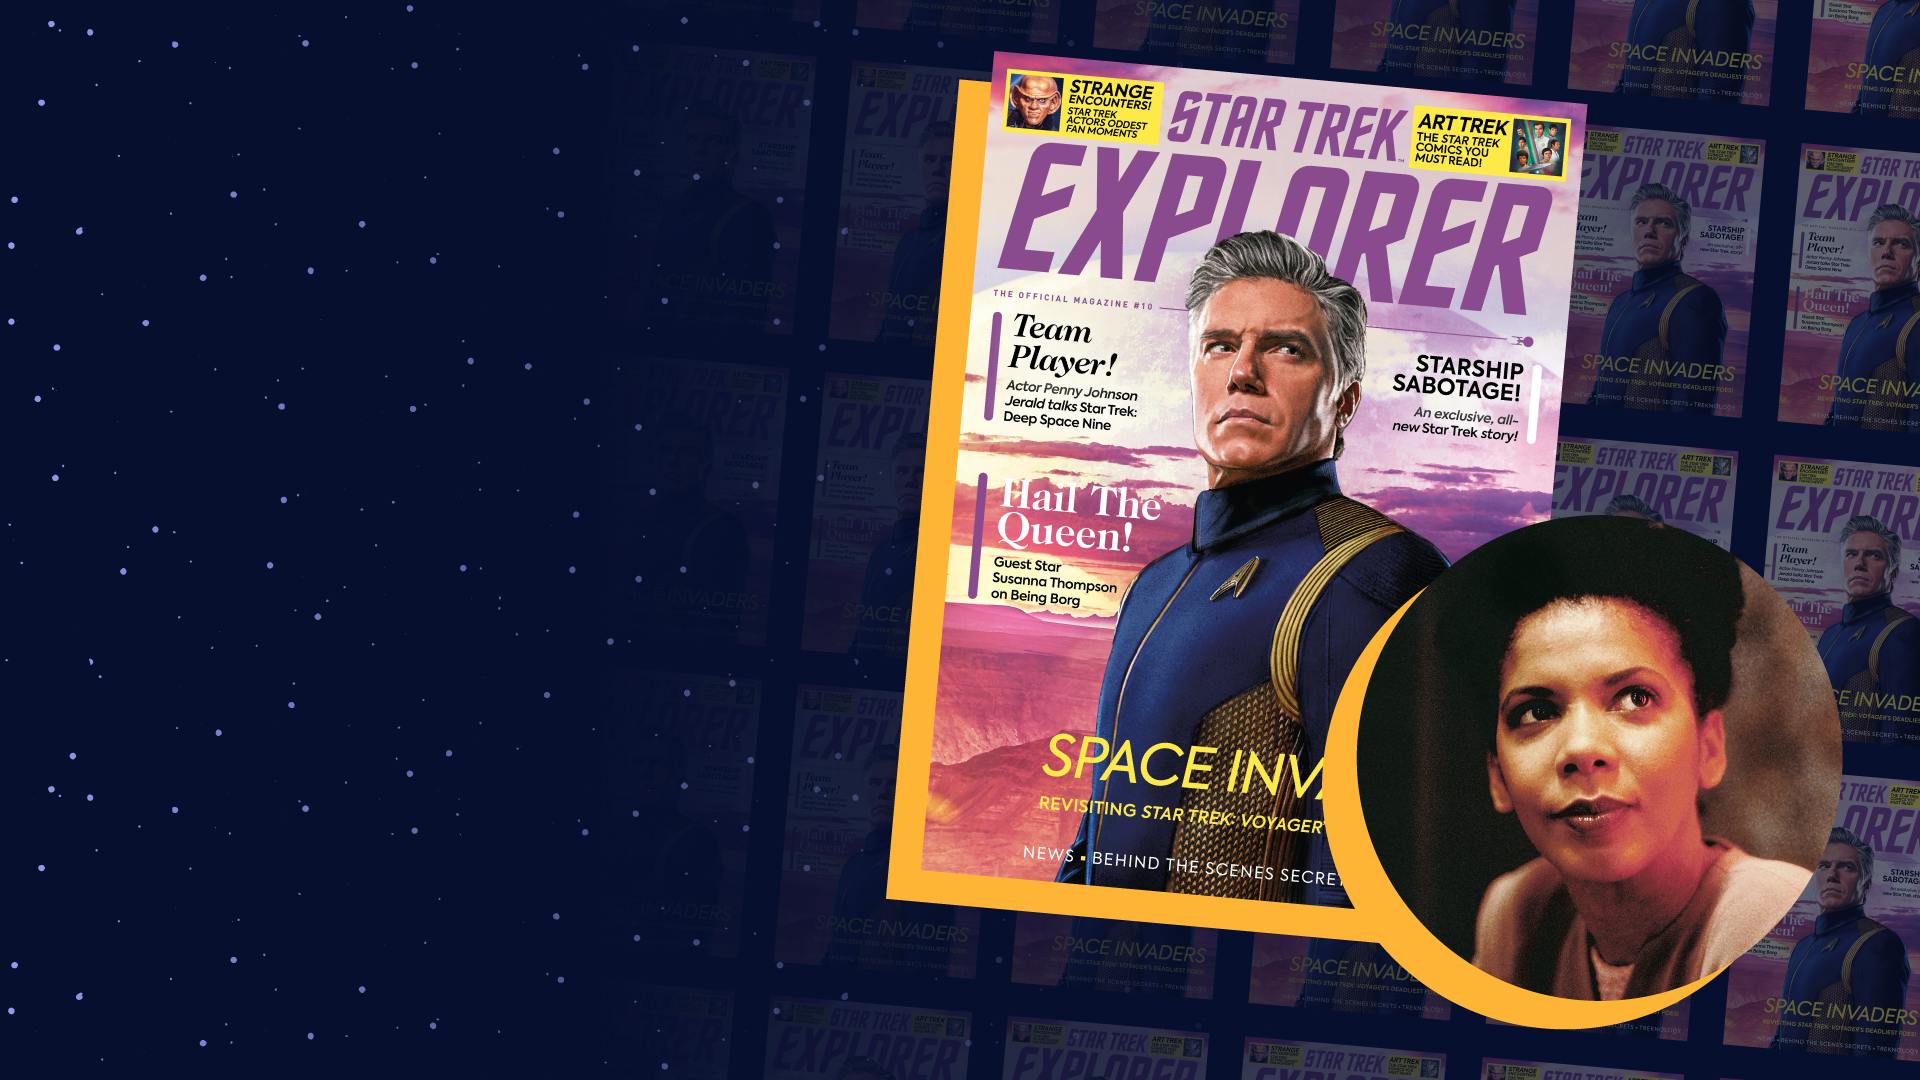 Banner featuring Star Trek Explorer #10 cover issue and Star Trek: Deep Space Nine episodic image of Penny Johnson Jerald as Kasidy Yates